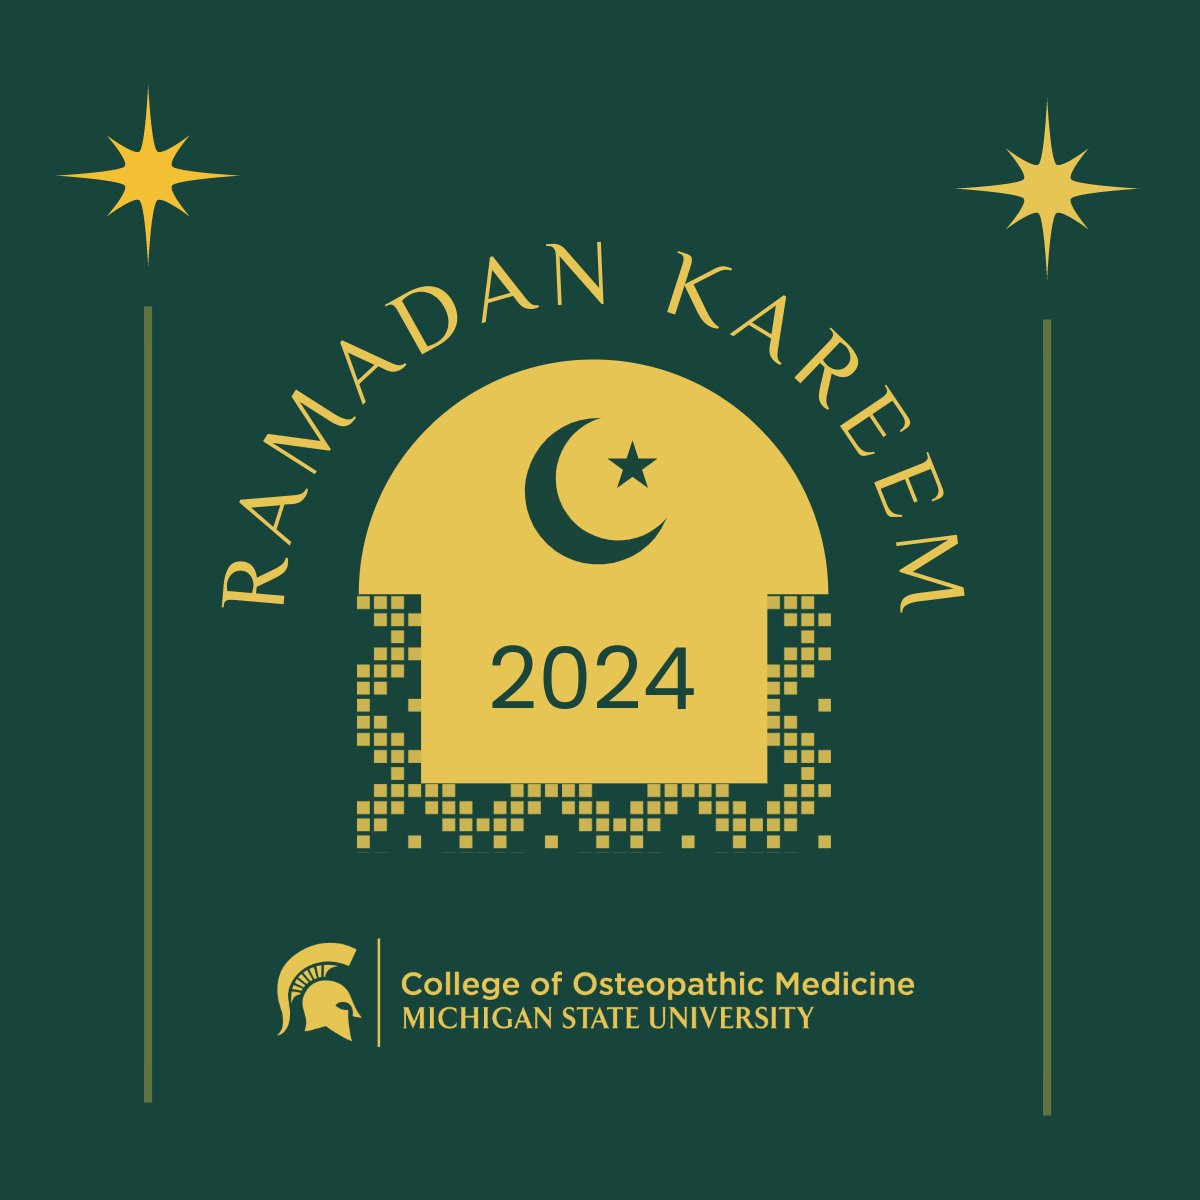 Sending wishes for a peaceful Ramadan to all members of our Spartan community who observe!